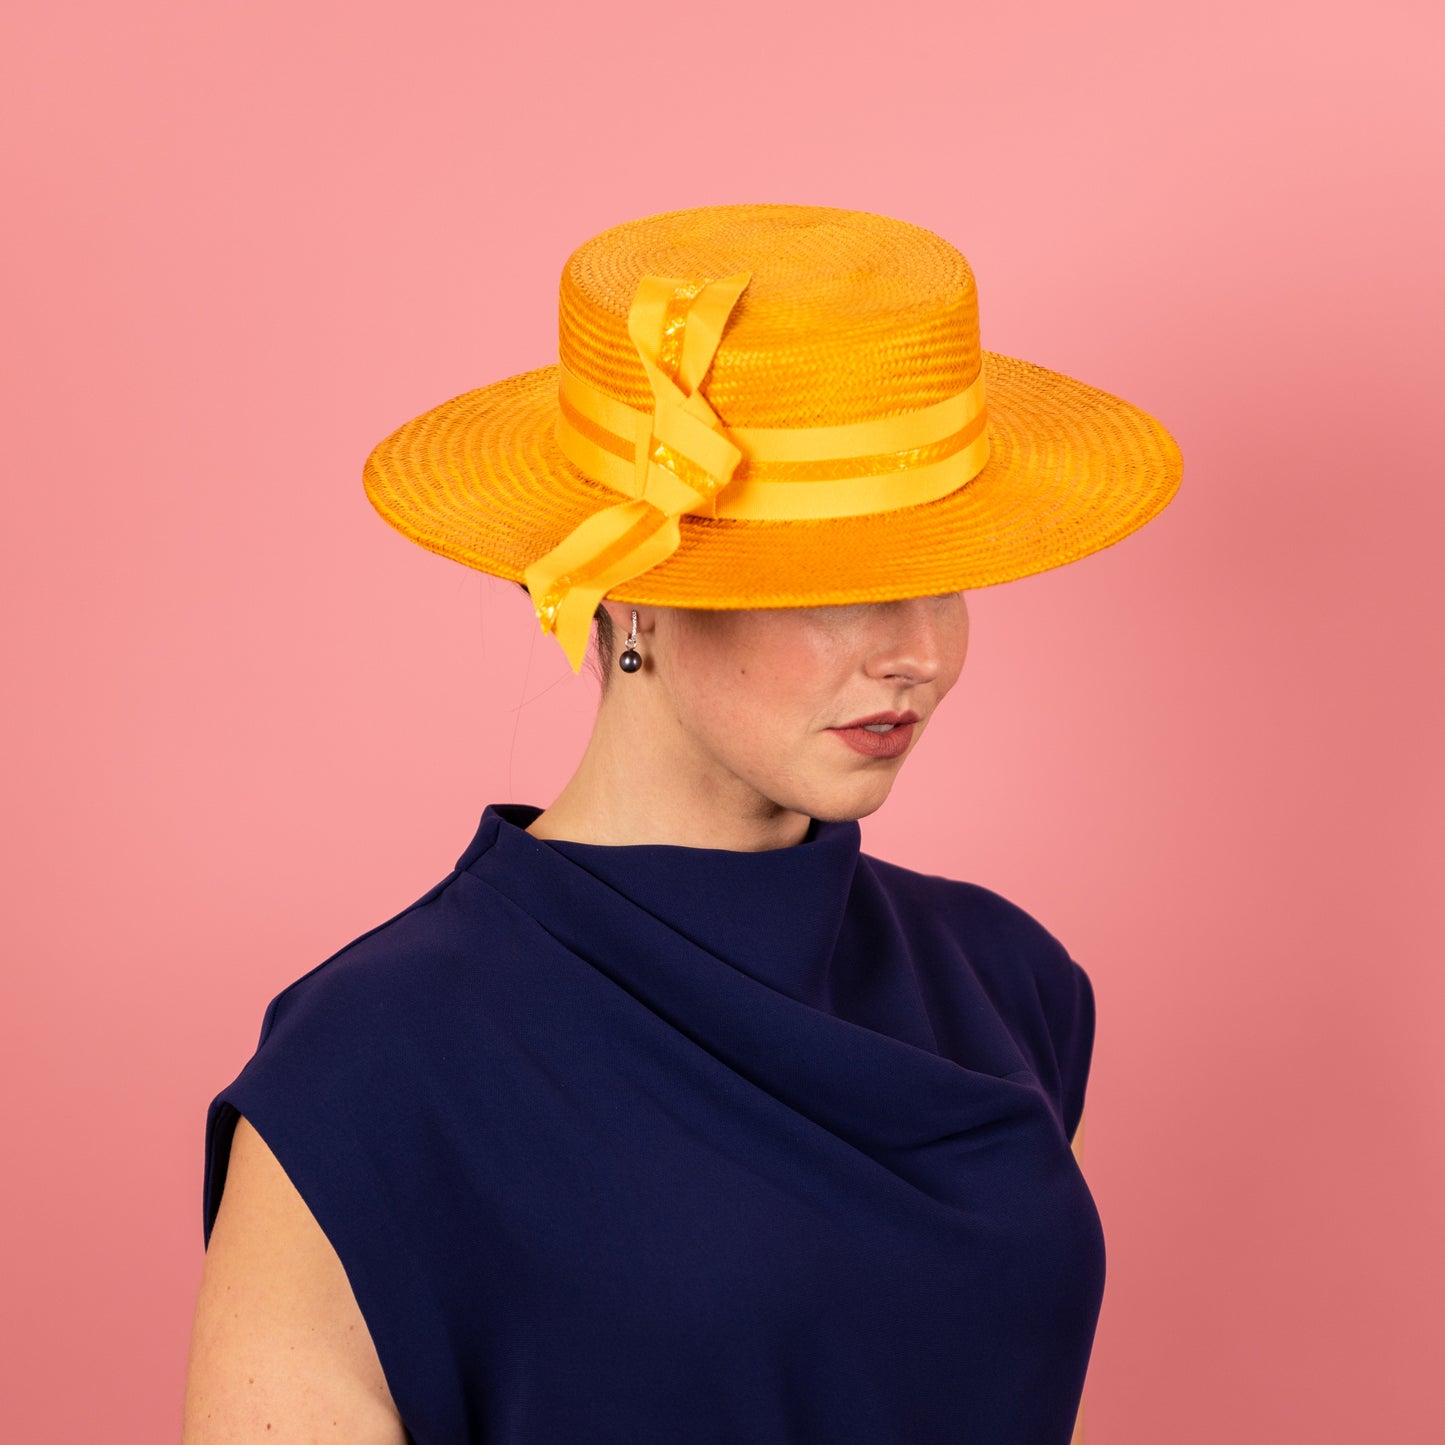 Alexis Boater in Marigold Yellow with Knotted Straw Trim